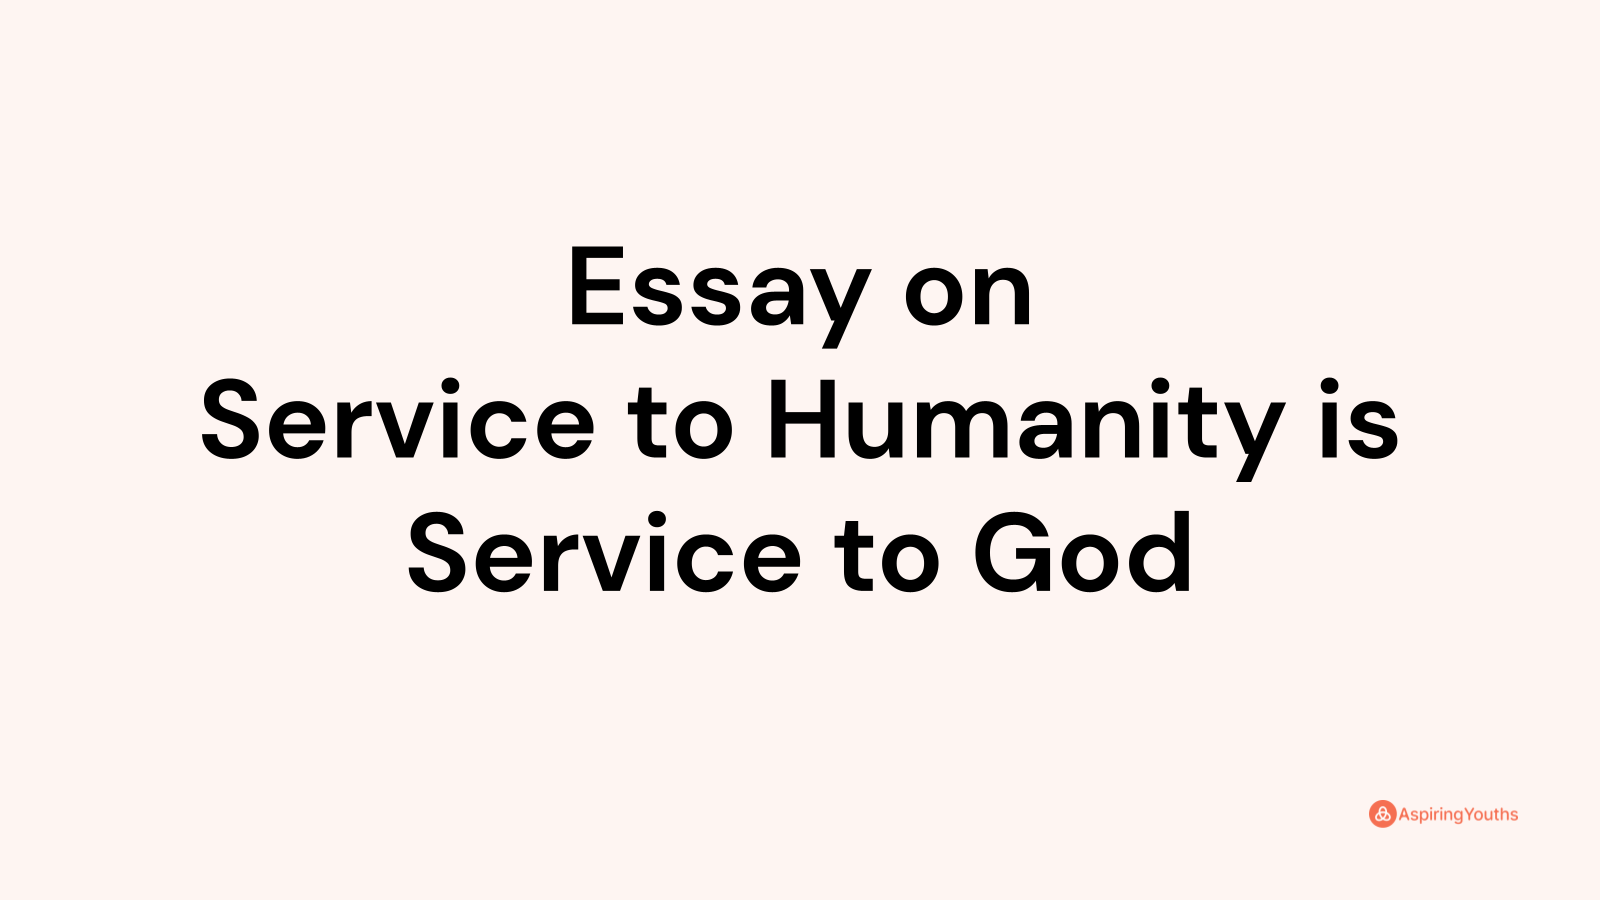 write an essay on service to humanity is service to god